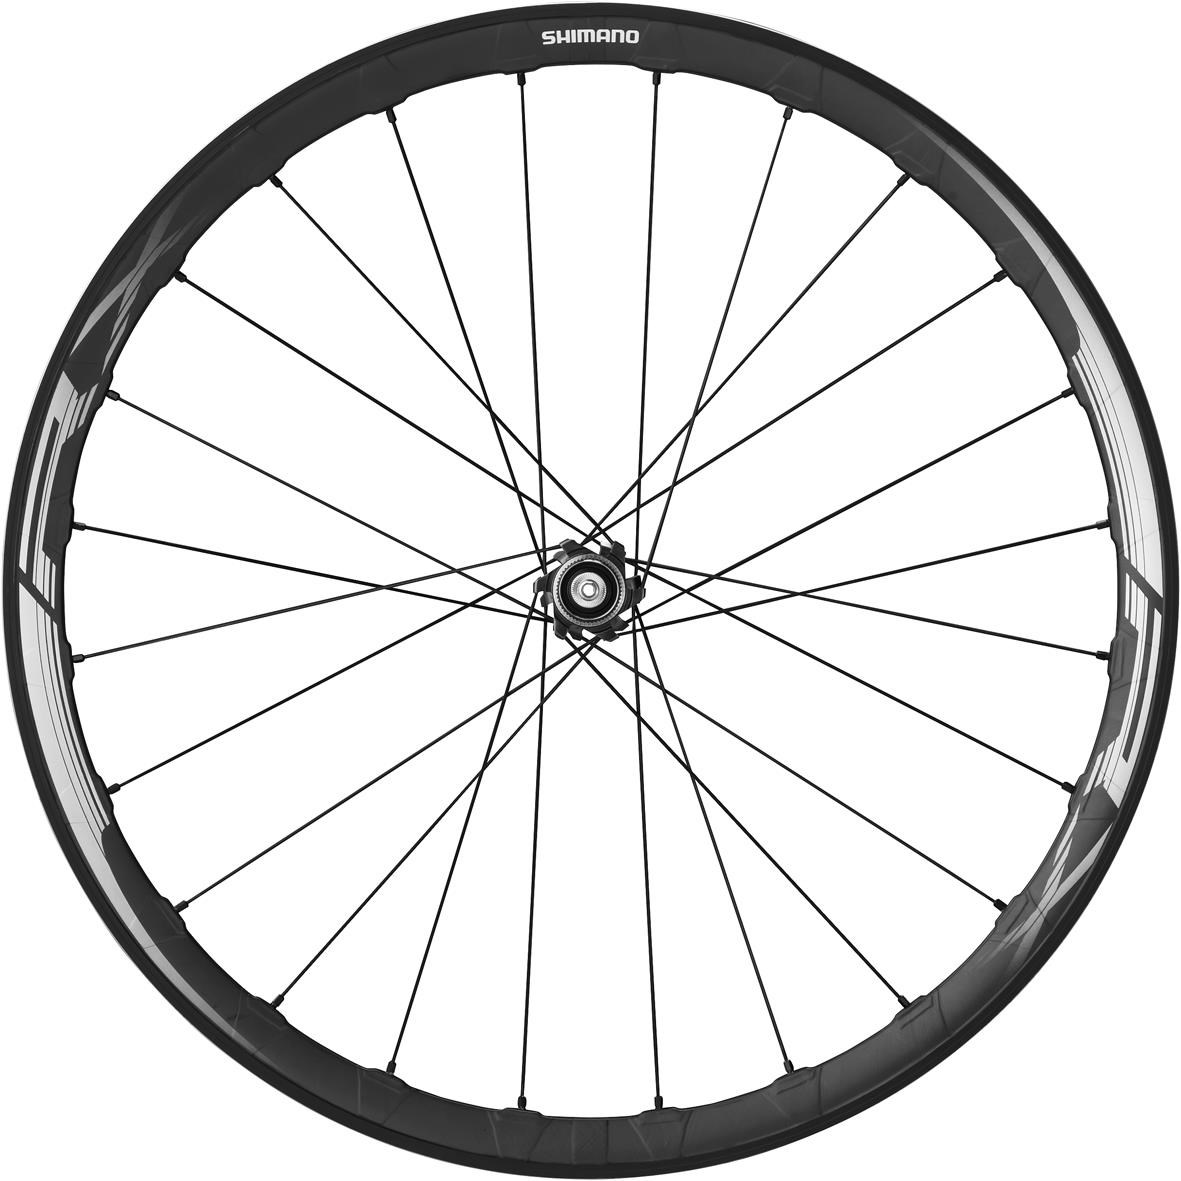 Shimano WH-RX830 Disc Road Wheel - Tubeless Ready Clincher 35 mm - Front product image